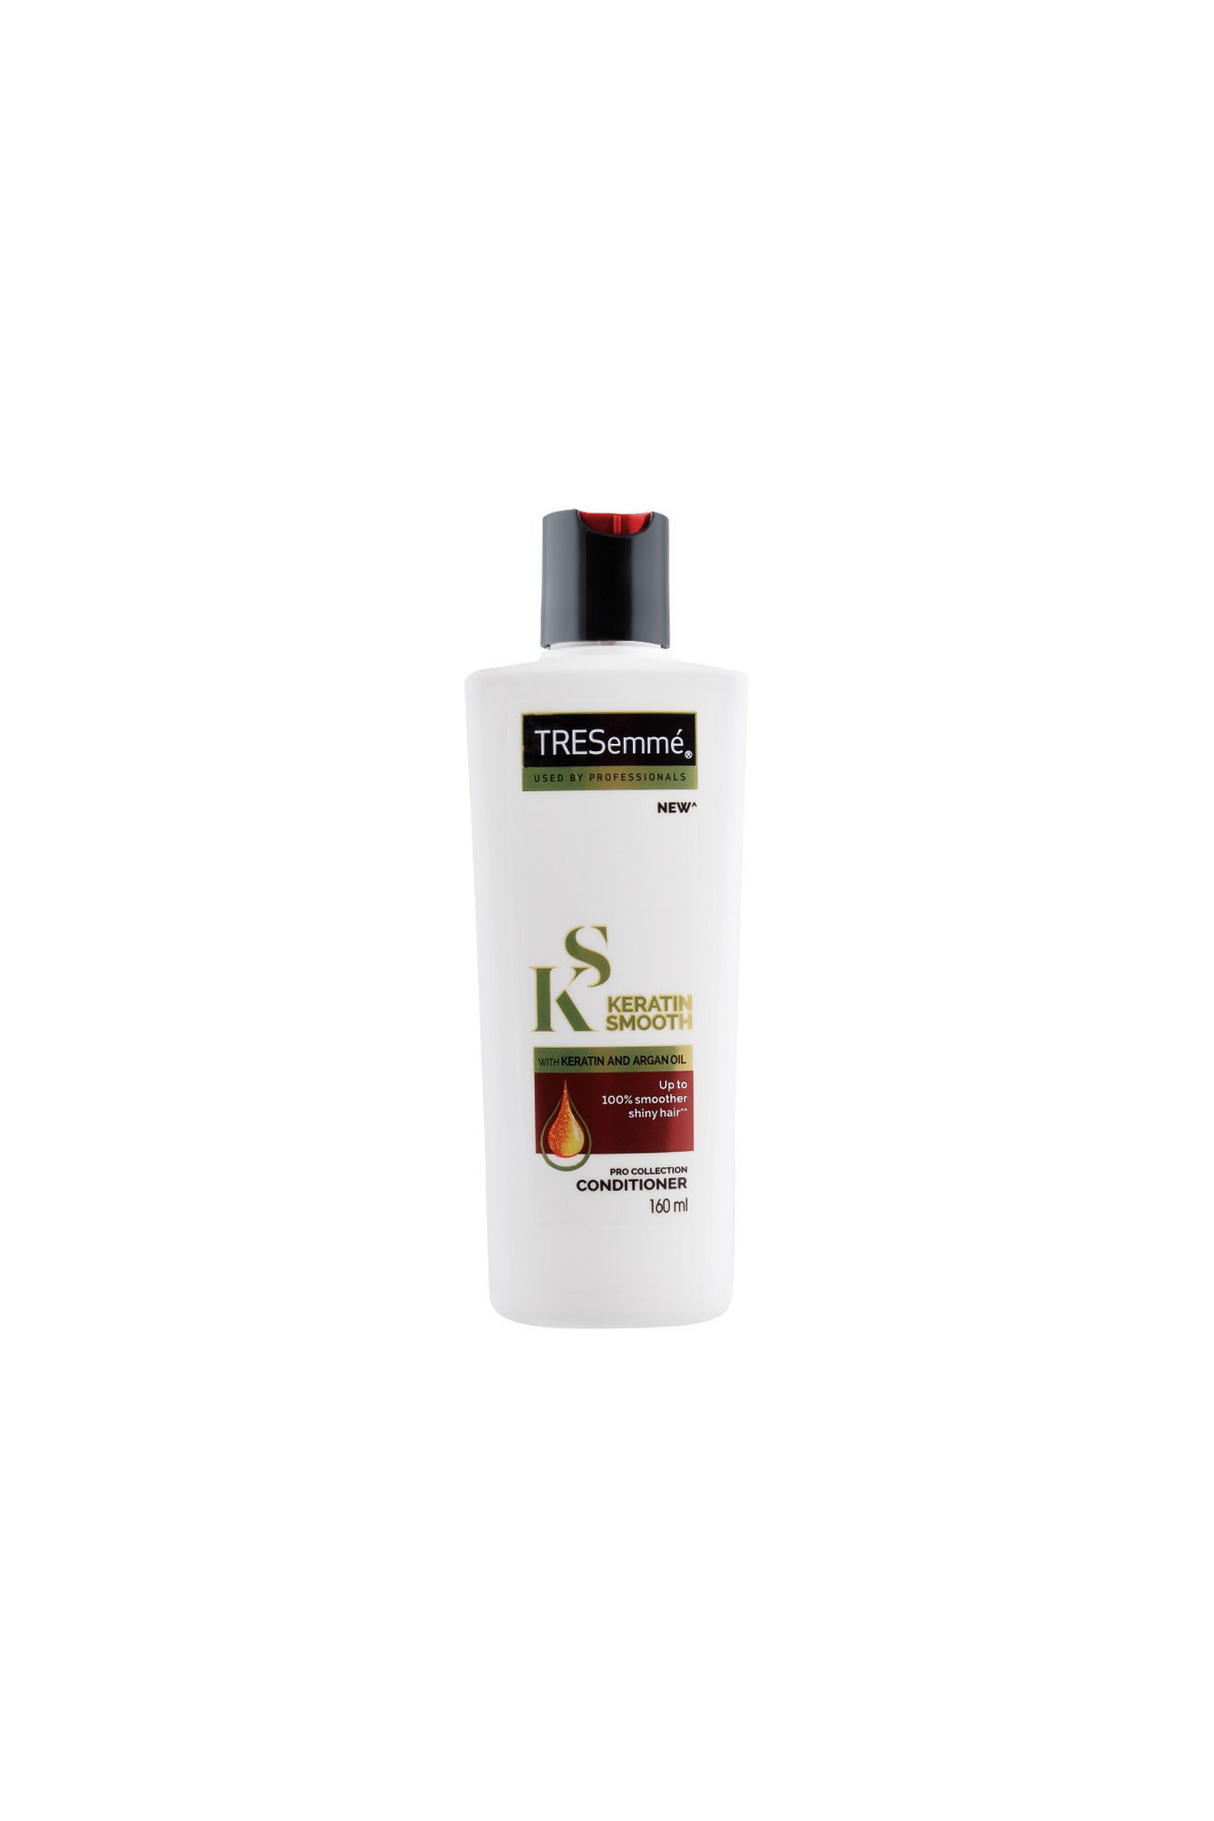 tresemme conditioner keratin smooth 170ml